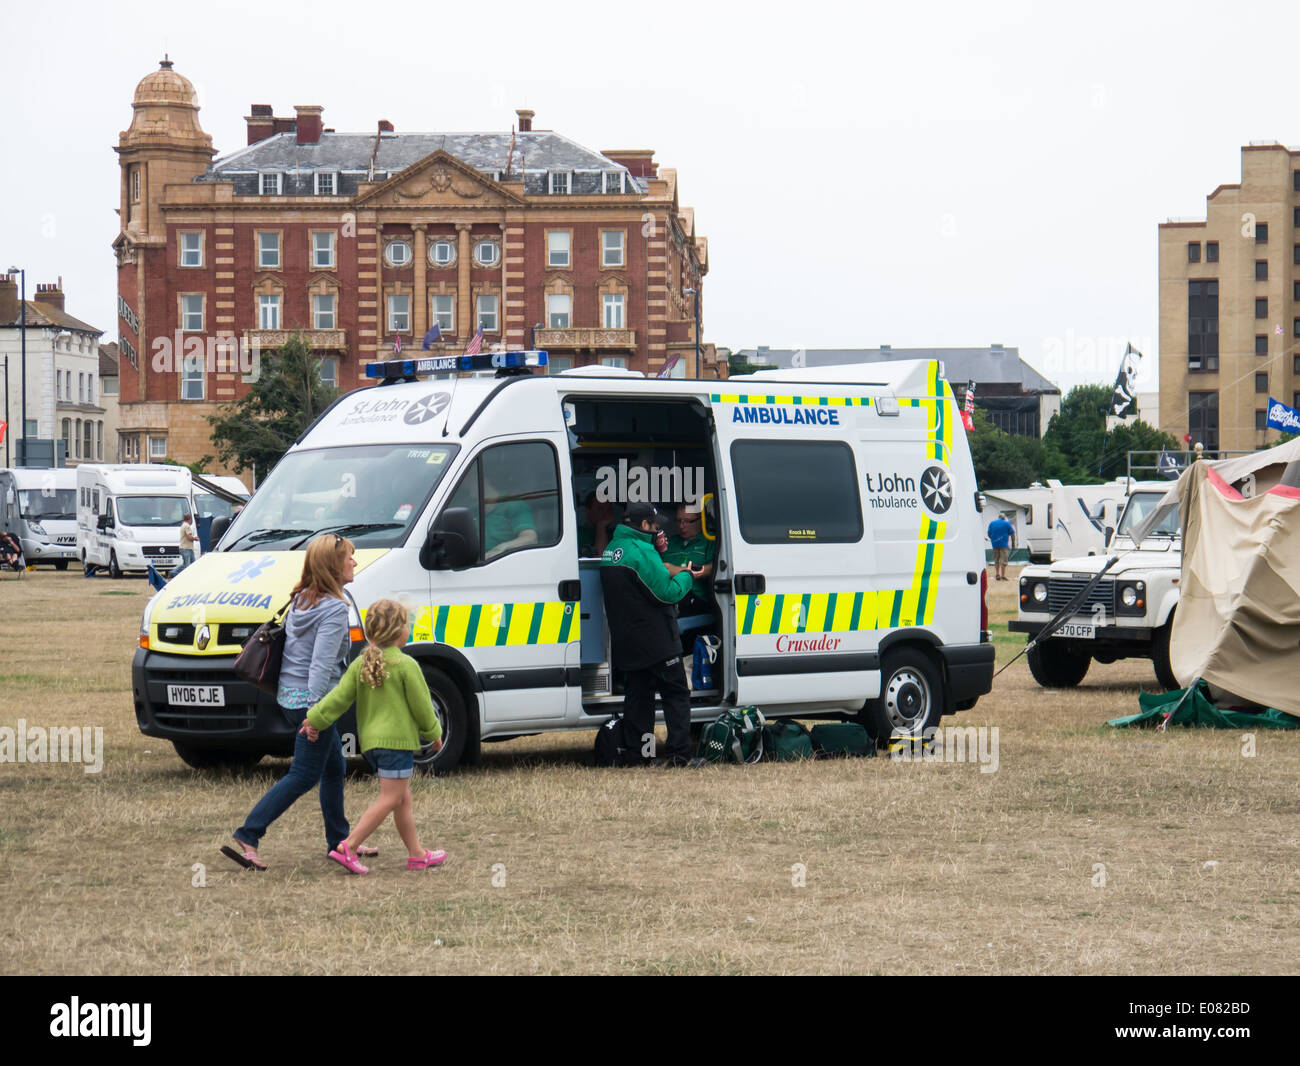 Members of St. John Ambulance providing emergency first aid cover from an ambulance at a community event. Stock Photo